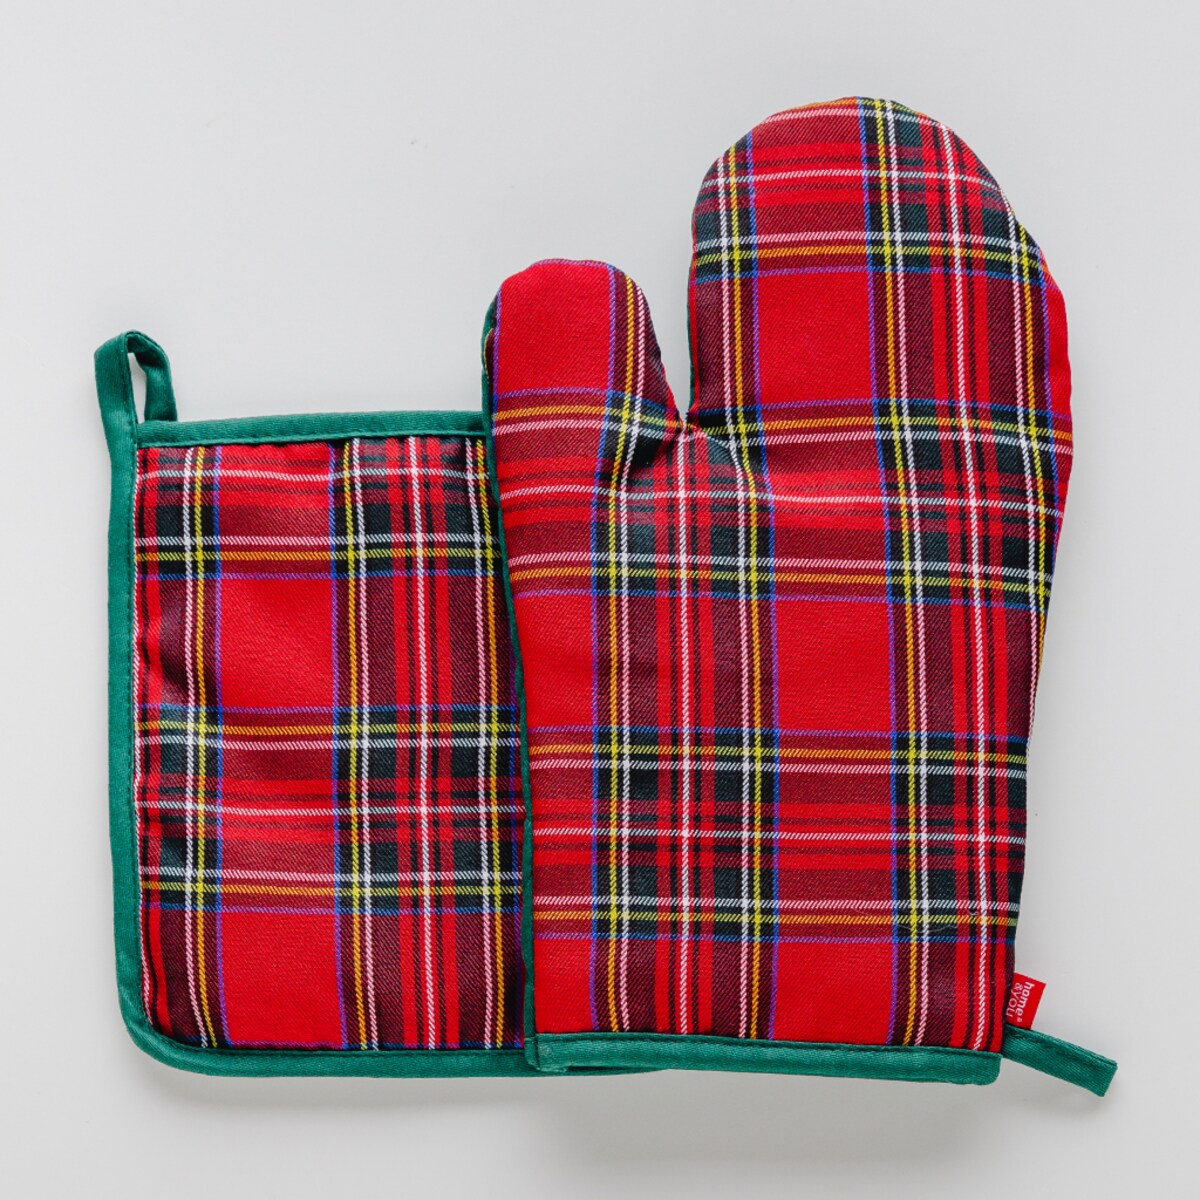 POT HOLDER AND OVEN GLOVE Madrase